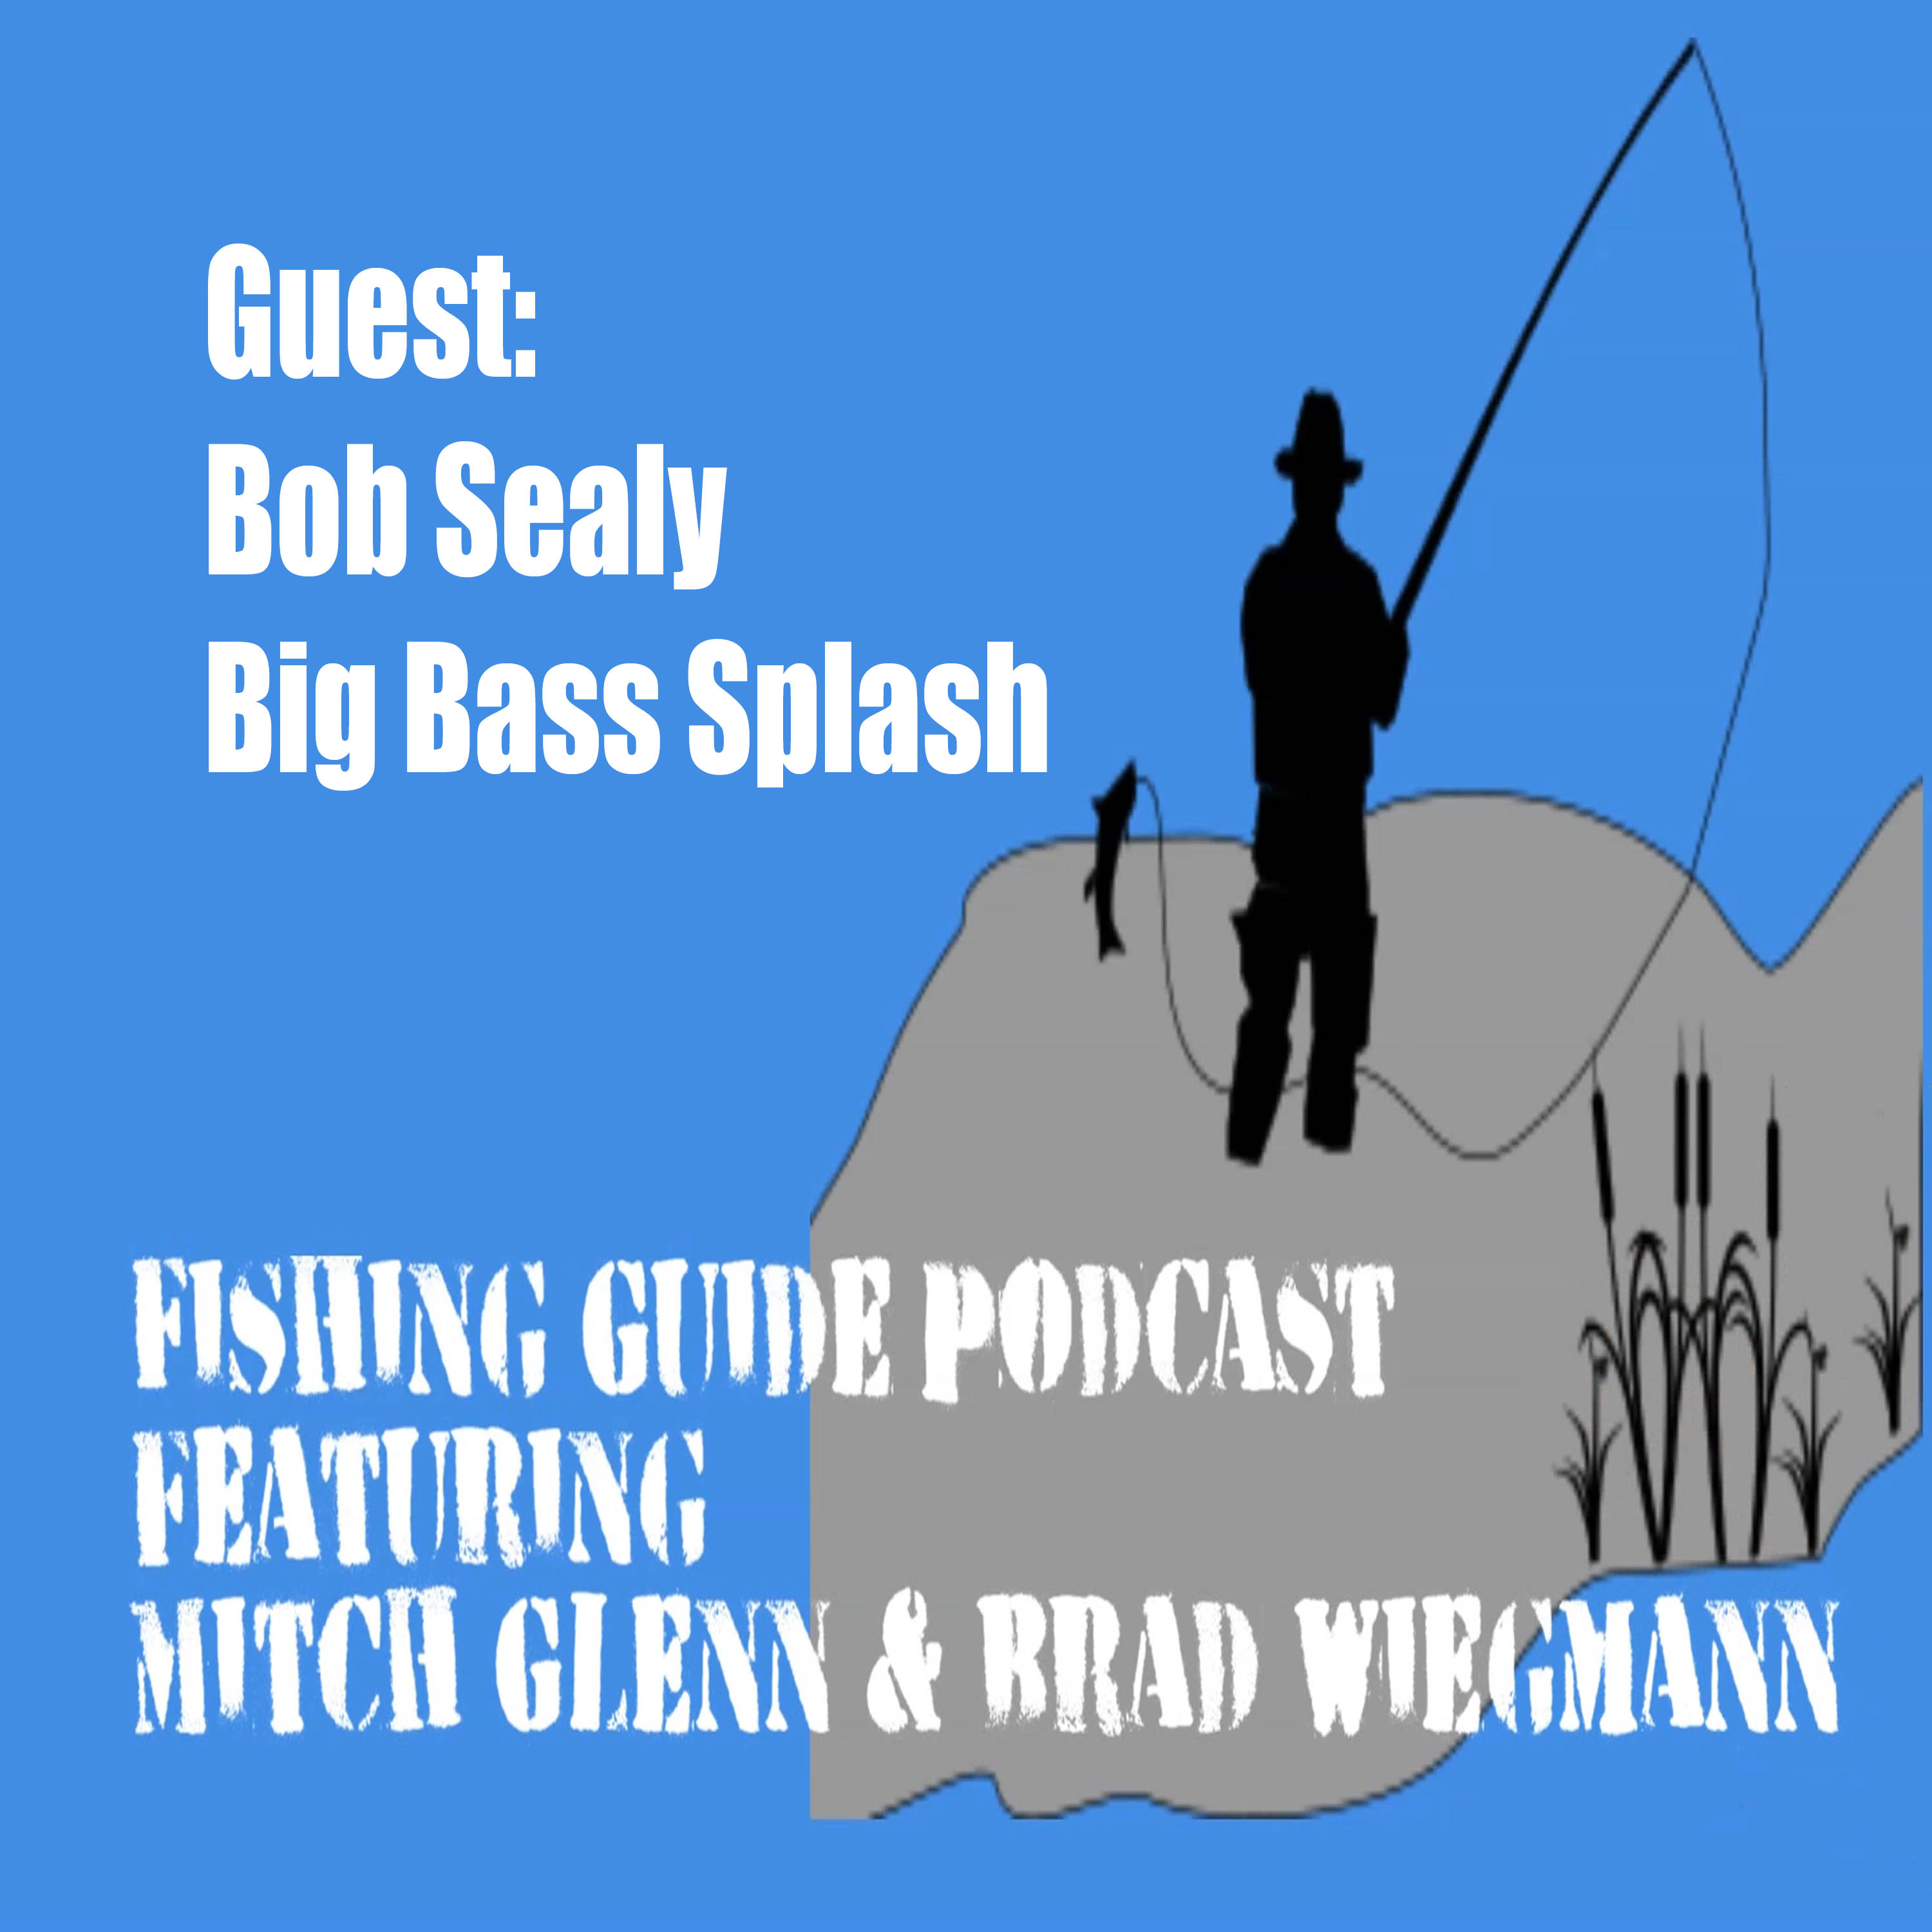 Bob Sealy CEO and Founder of the Big Bass Splash talks about the tournaments